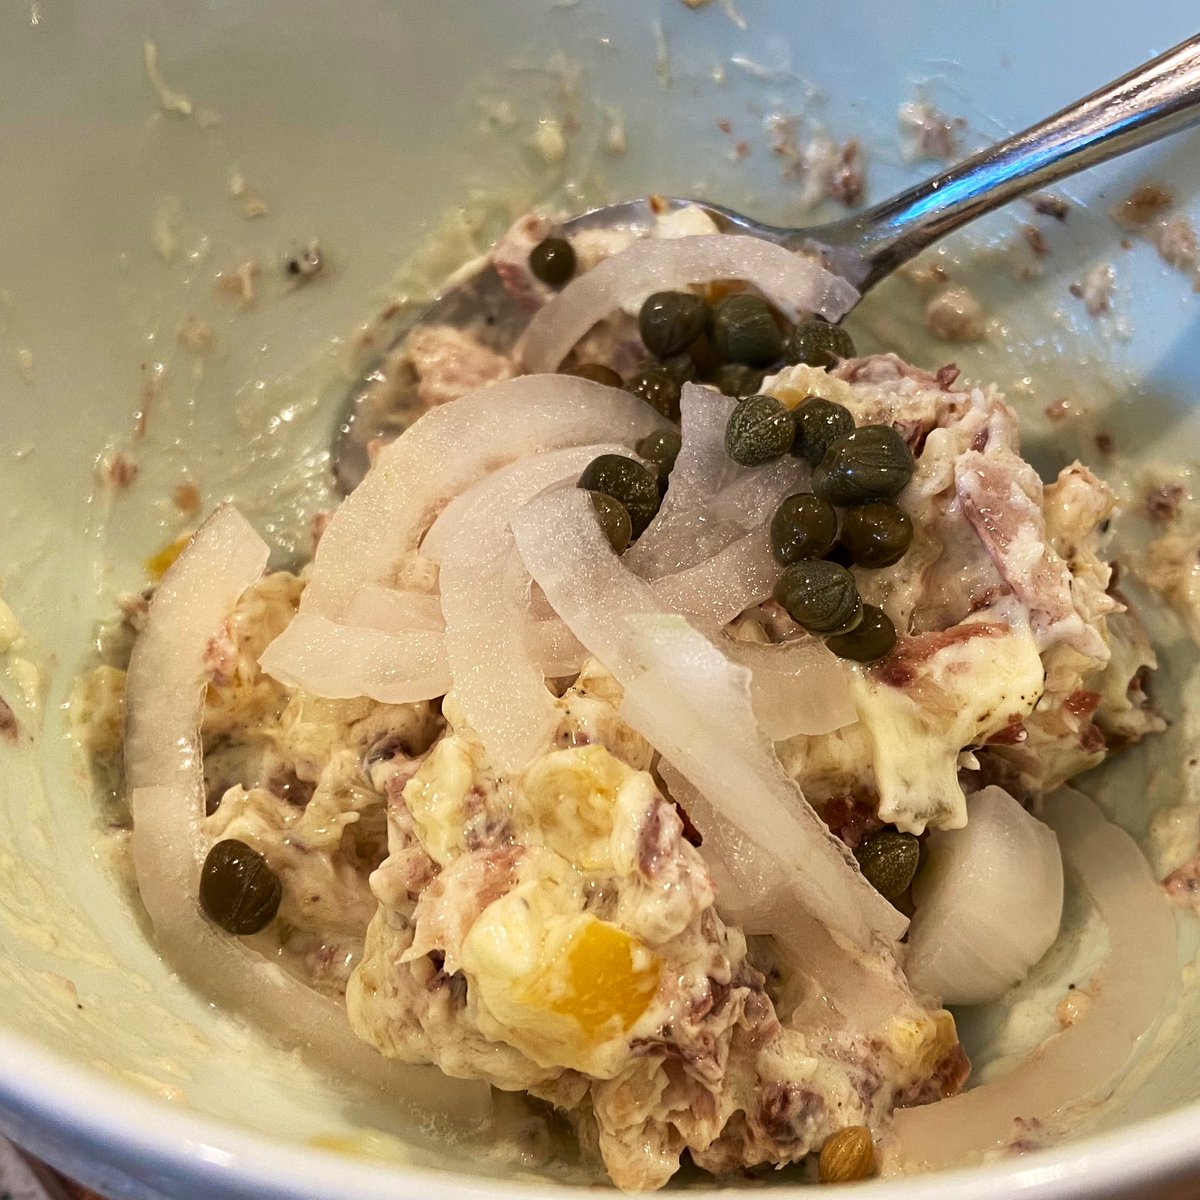 This is going to need some tang. So I make some quick pickled onions, toss it in with the chopped sardines, add some capers, and fresh grind some black pepper.I have the undivided attention of both kids. They ask to eat some coriander seeds and like it so I know they’re hungry.